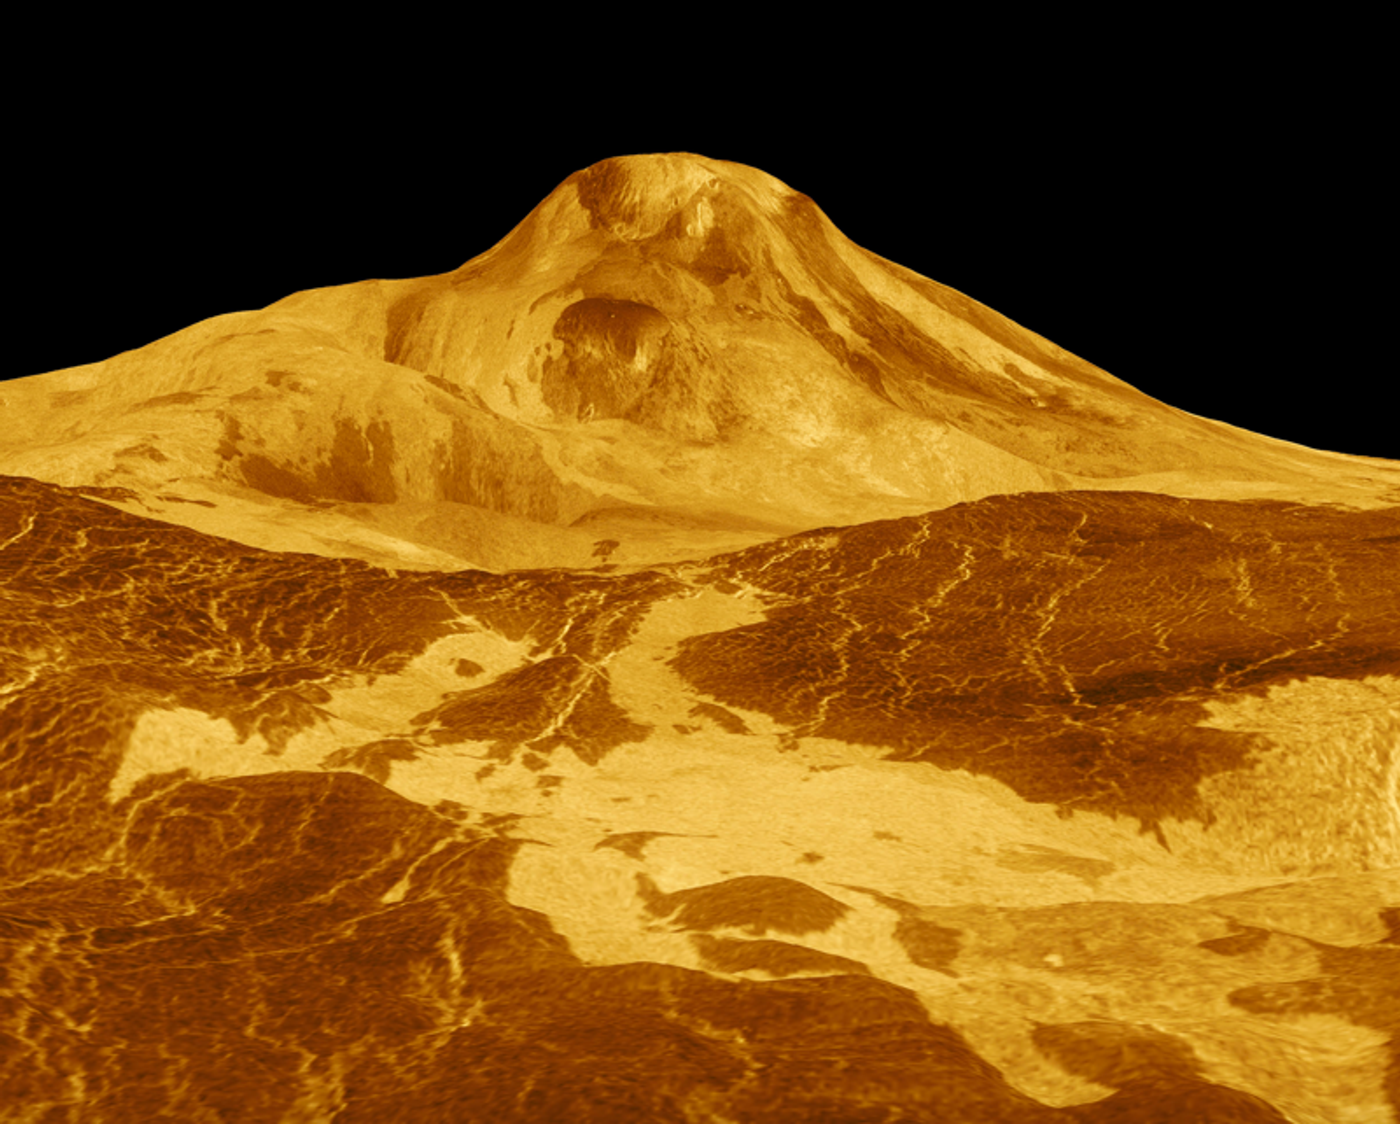 Venus may have had life-friendly conditions when life was forming on Earth.